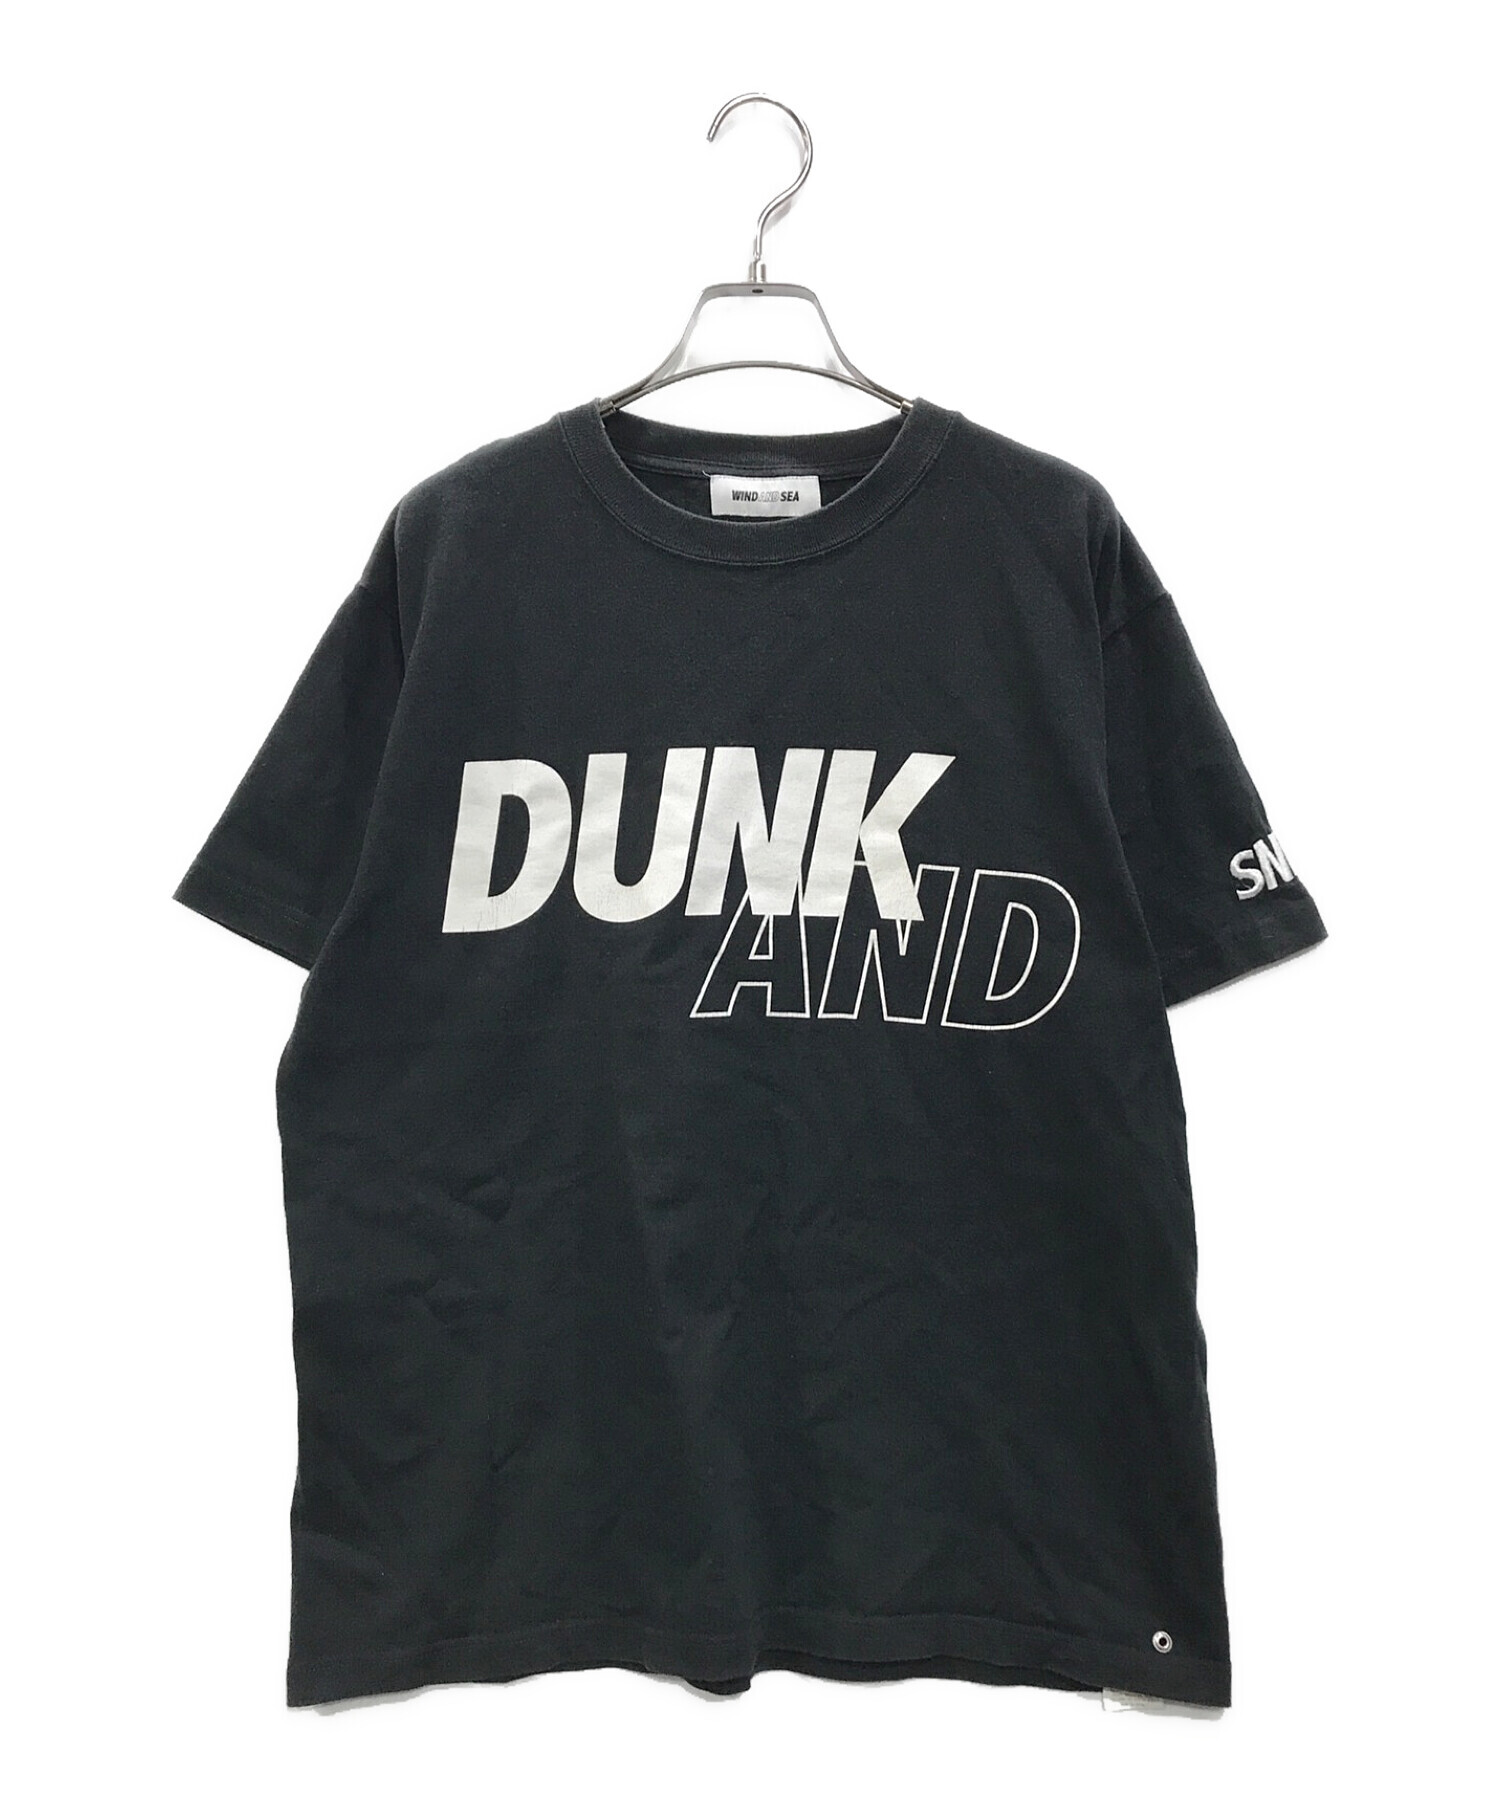 WIND AND SEA◇タグ付/SNKR DUNK X WDS/L/S TEE/スニーカーダンク/長袖 ...